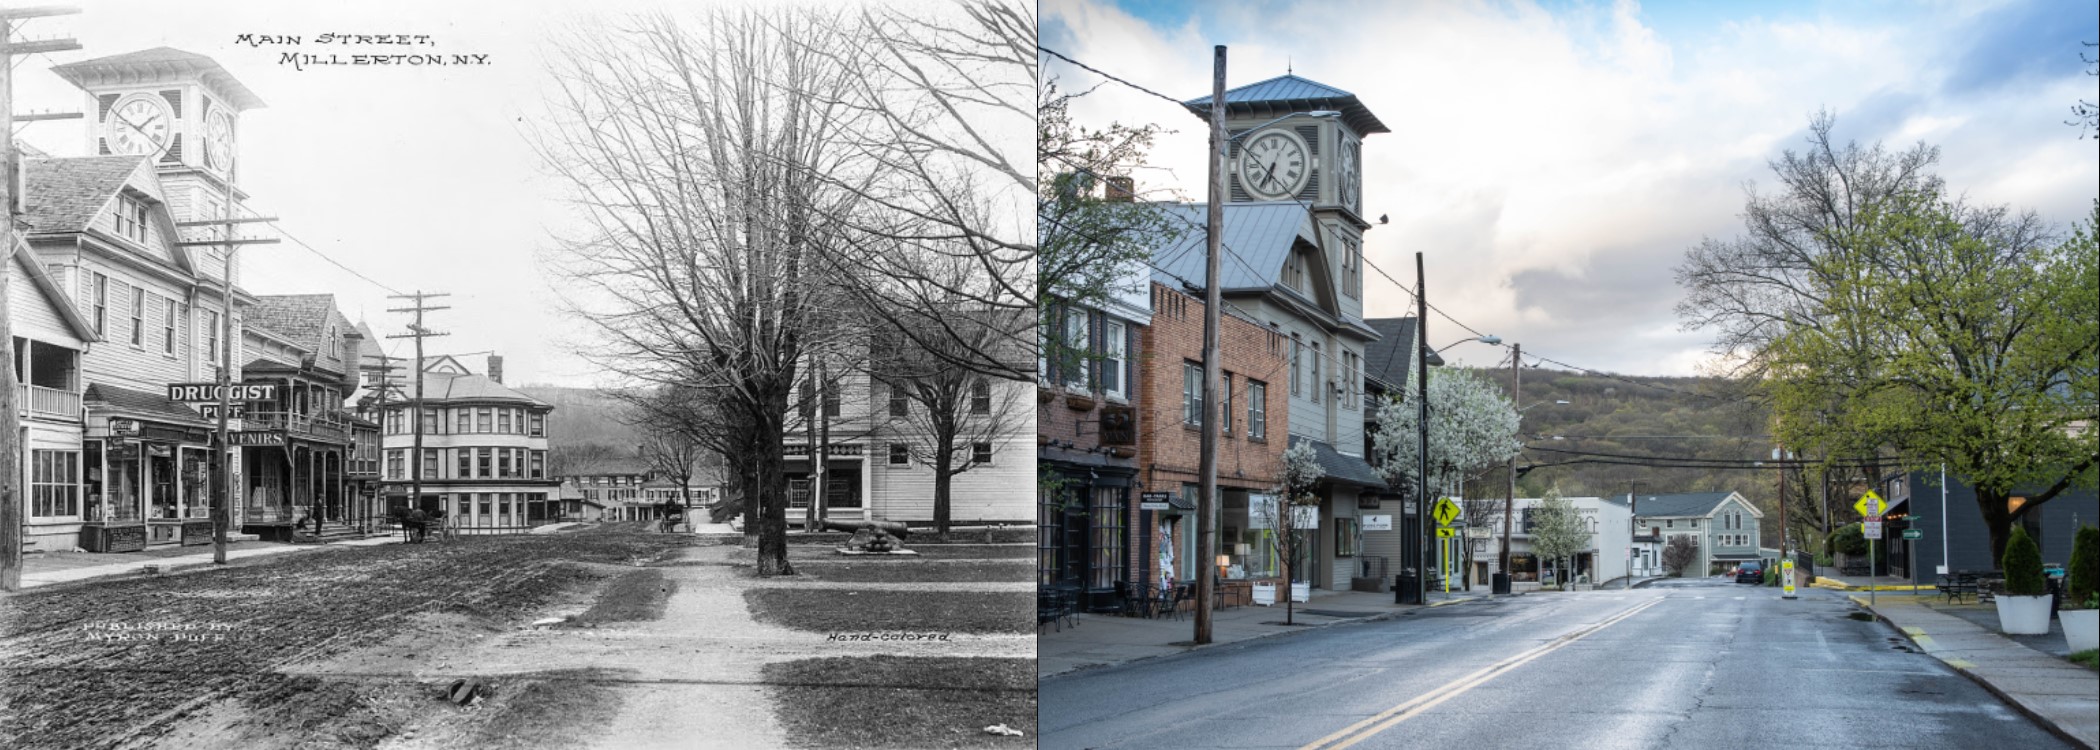 Pictures of Millerton Past and present